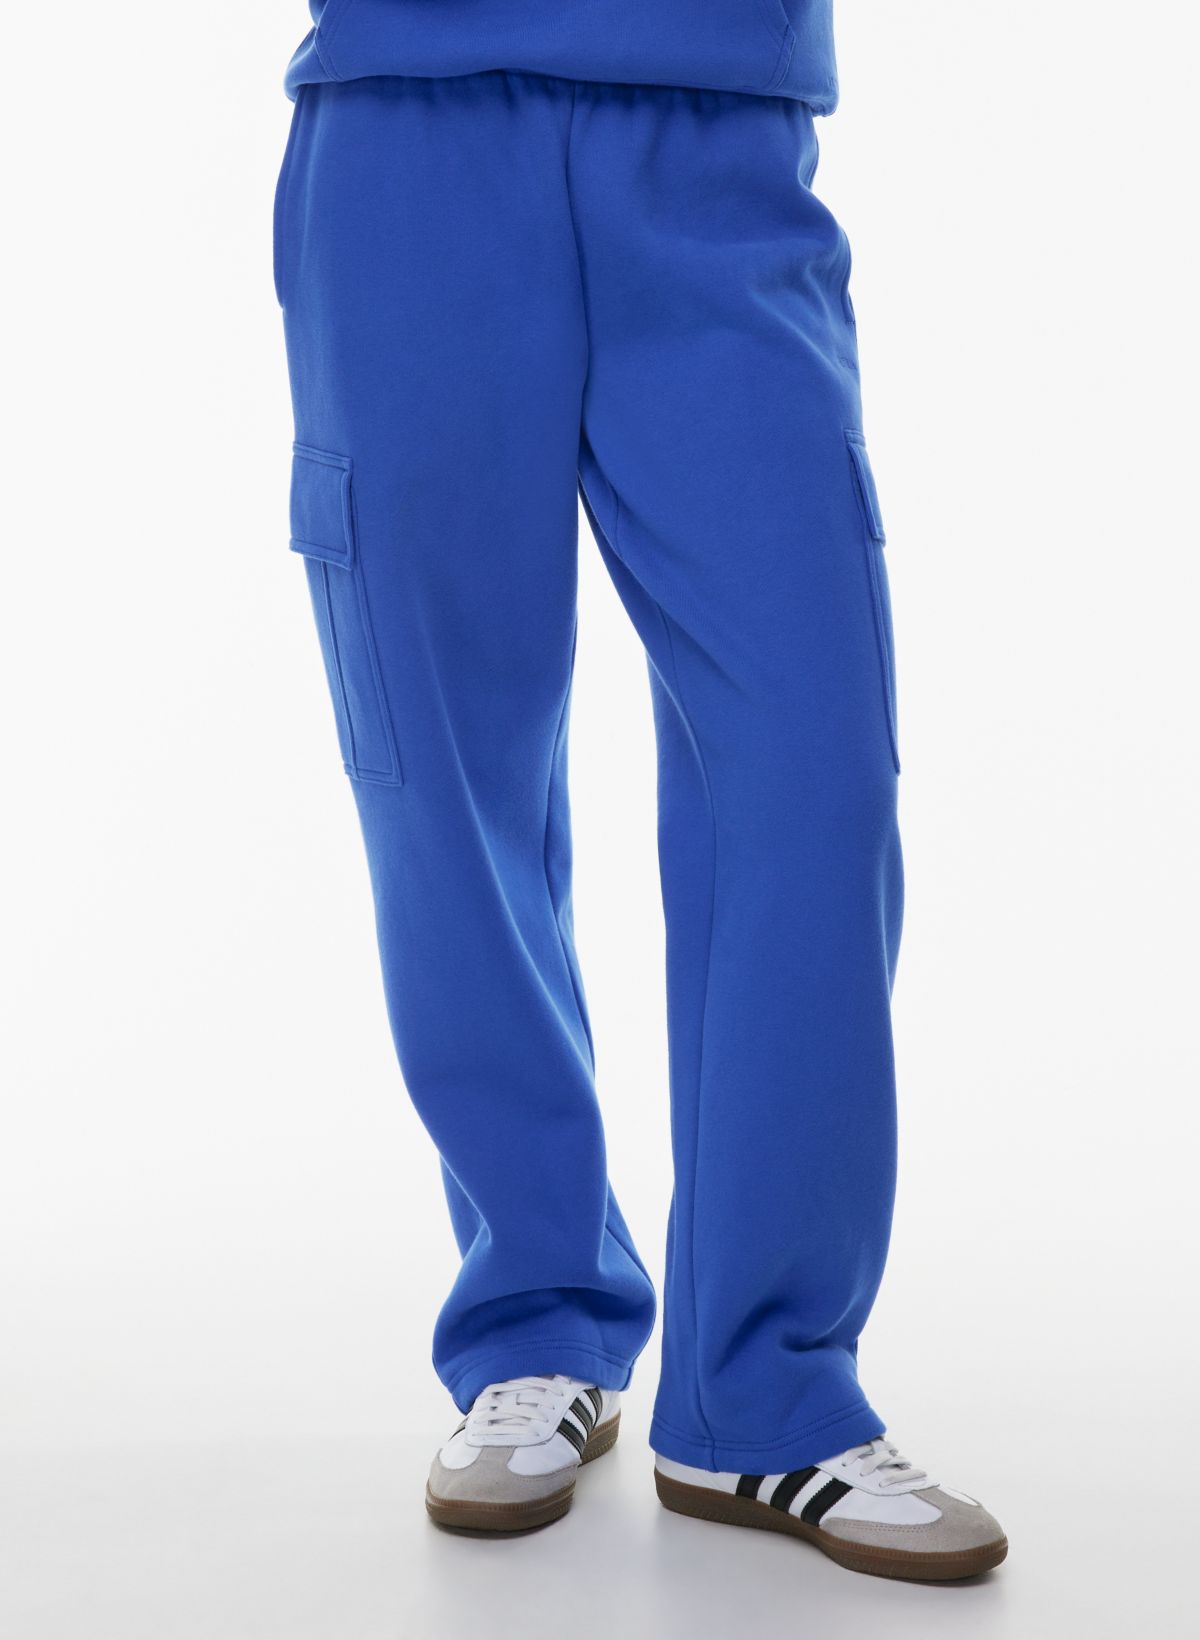 the gym people, Pants & Jumpsuits, The Gym People Sweat Blue Joggers  Pants Size S Nwt